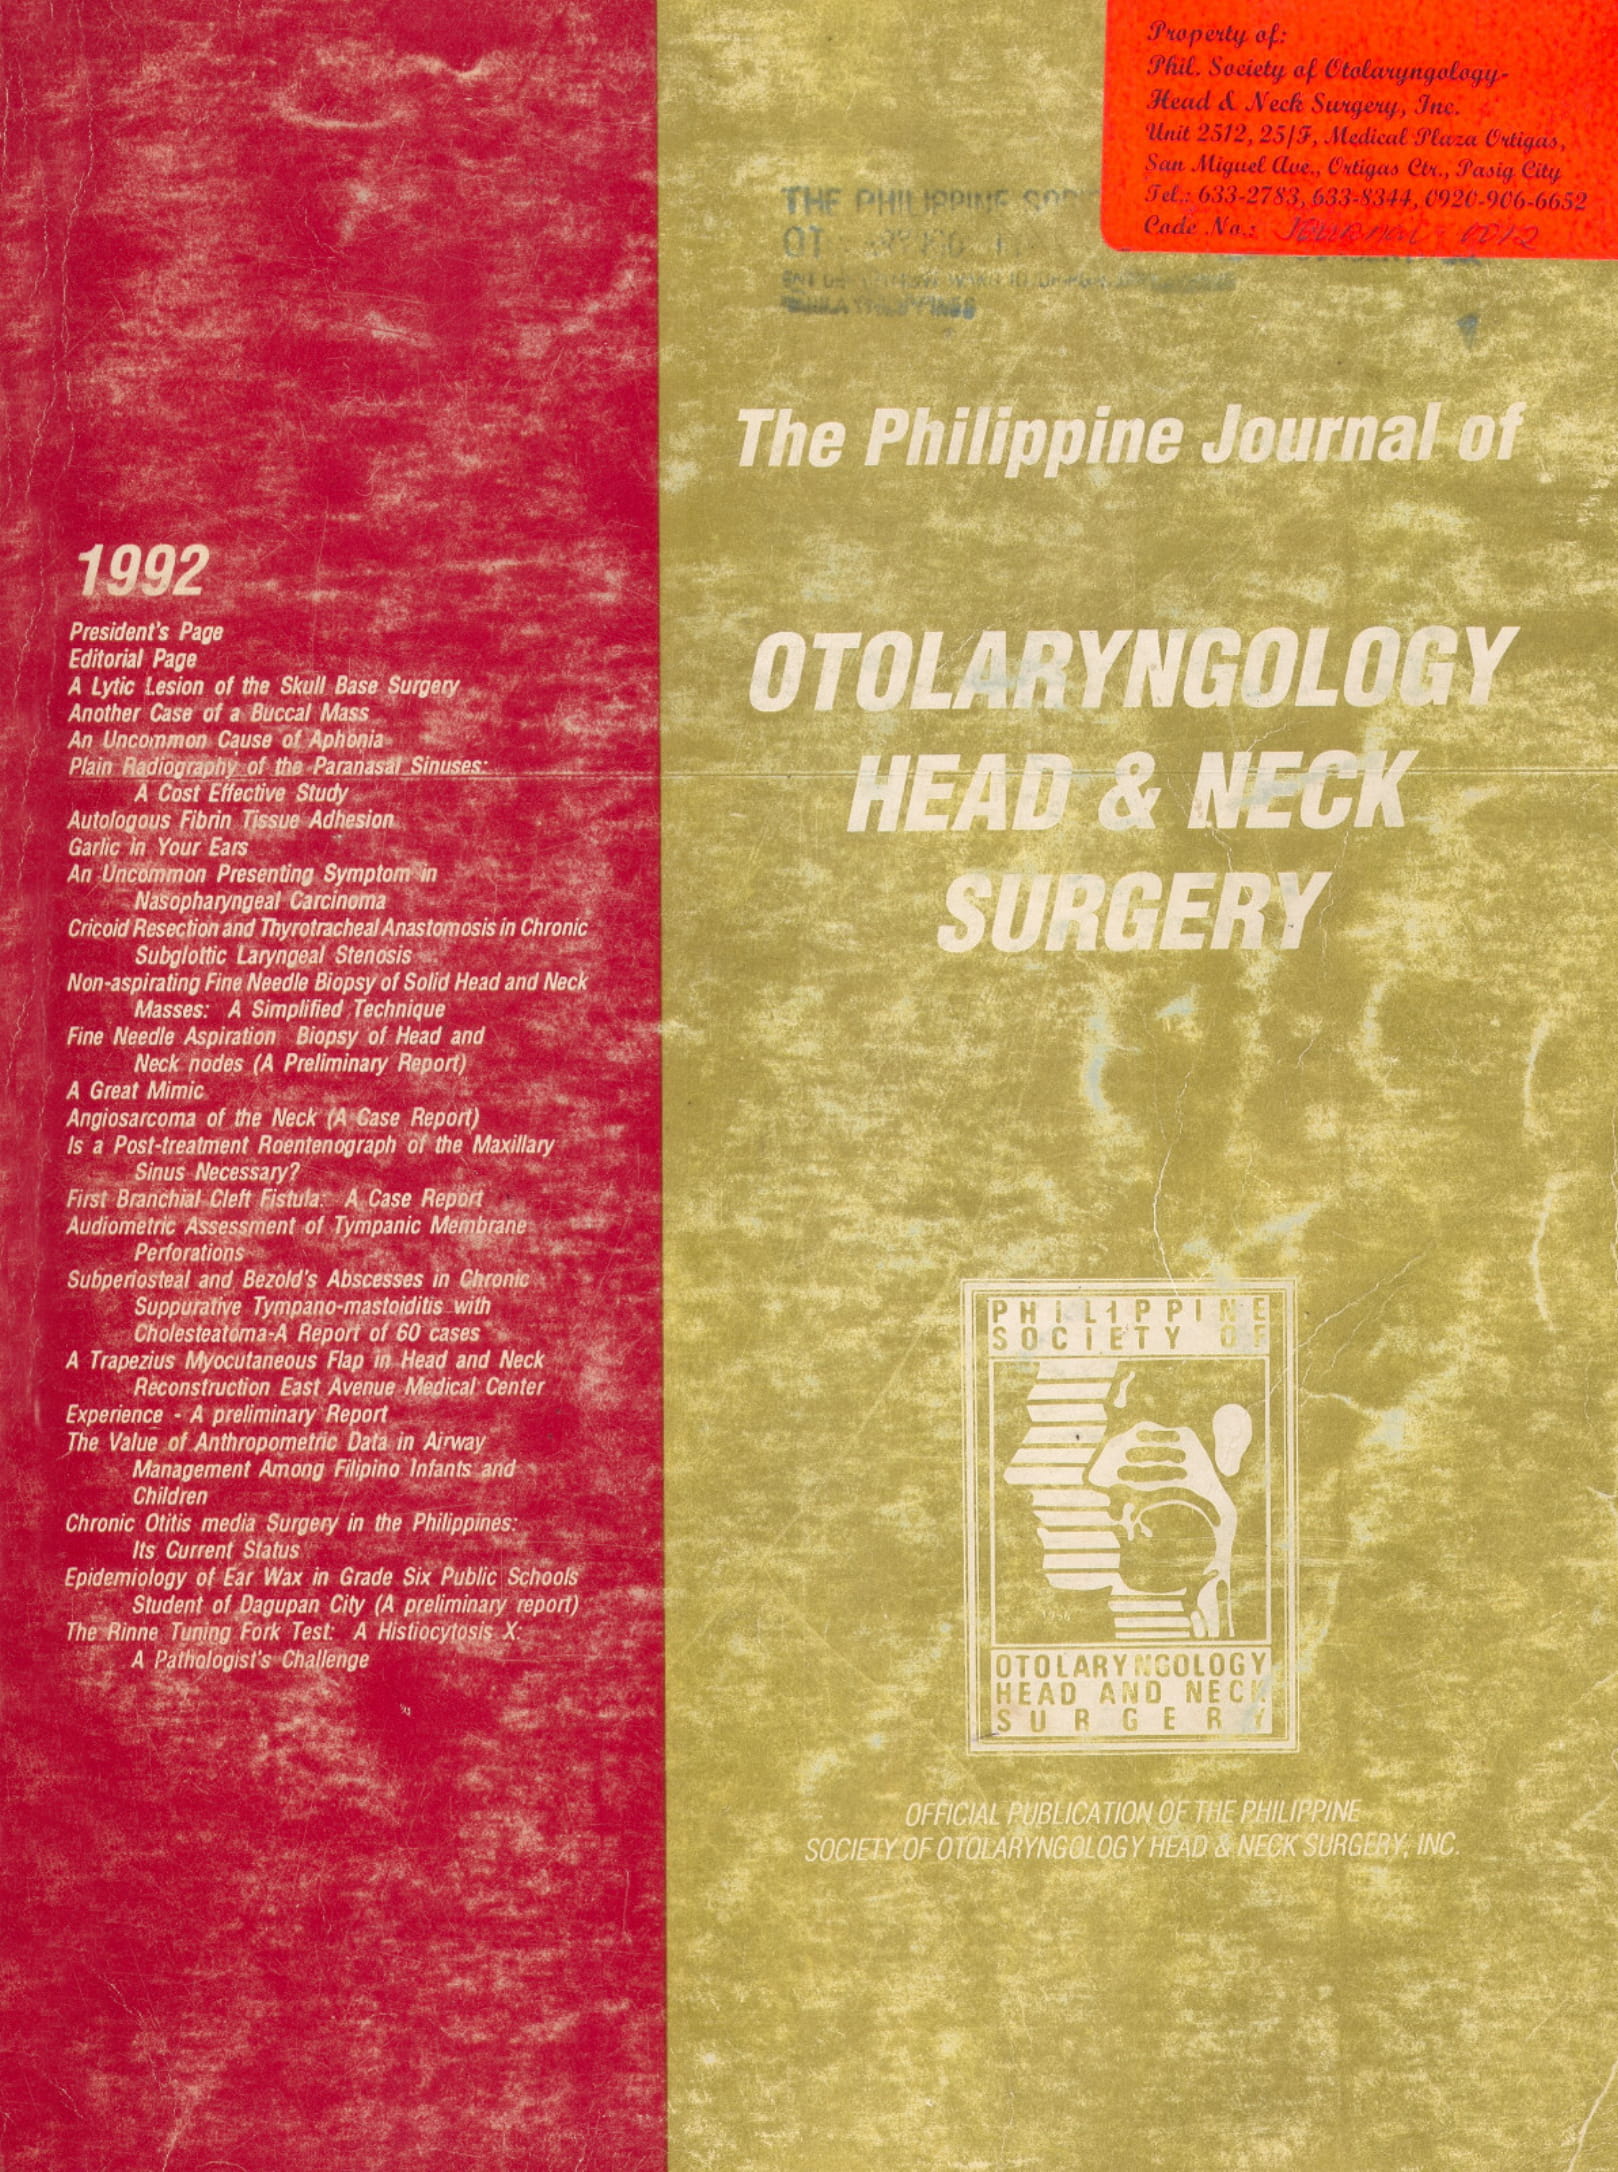 					View 1992: Philippine Journal of Otolaryngology-Head and Neck Surgery
				